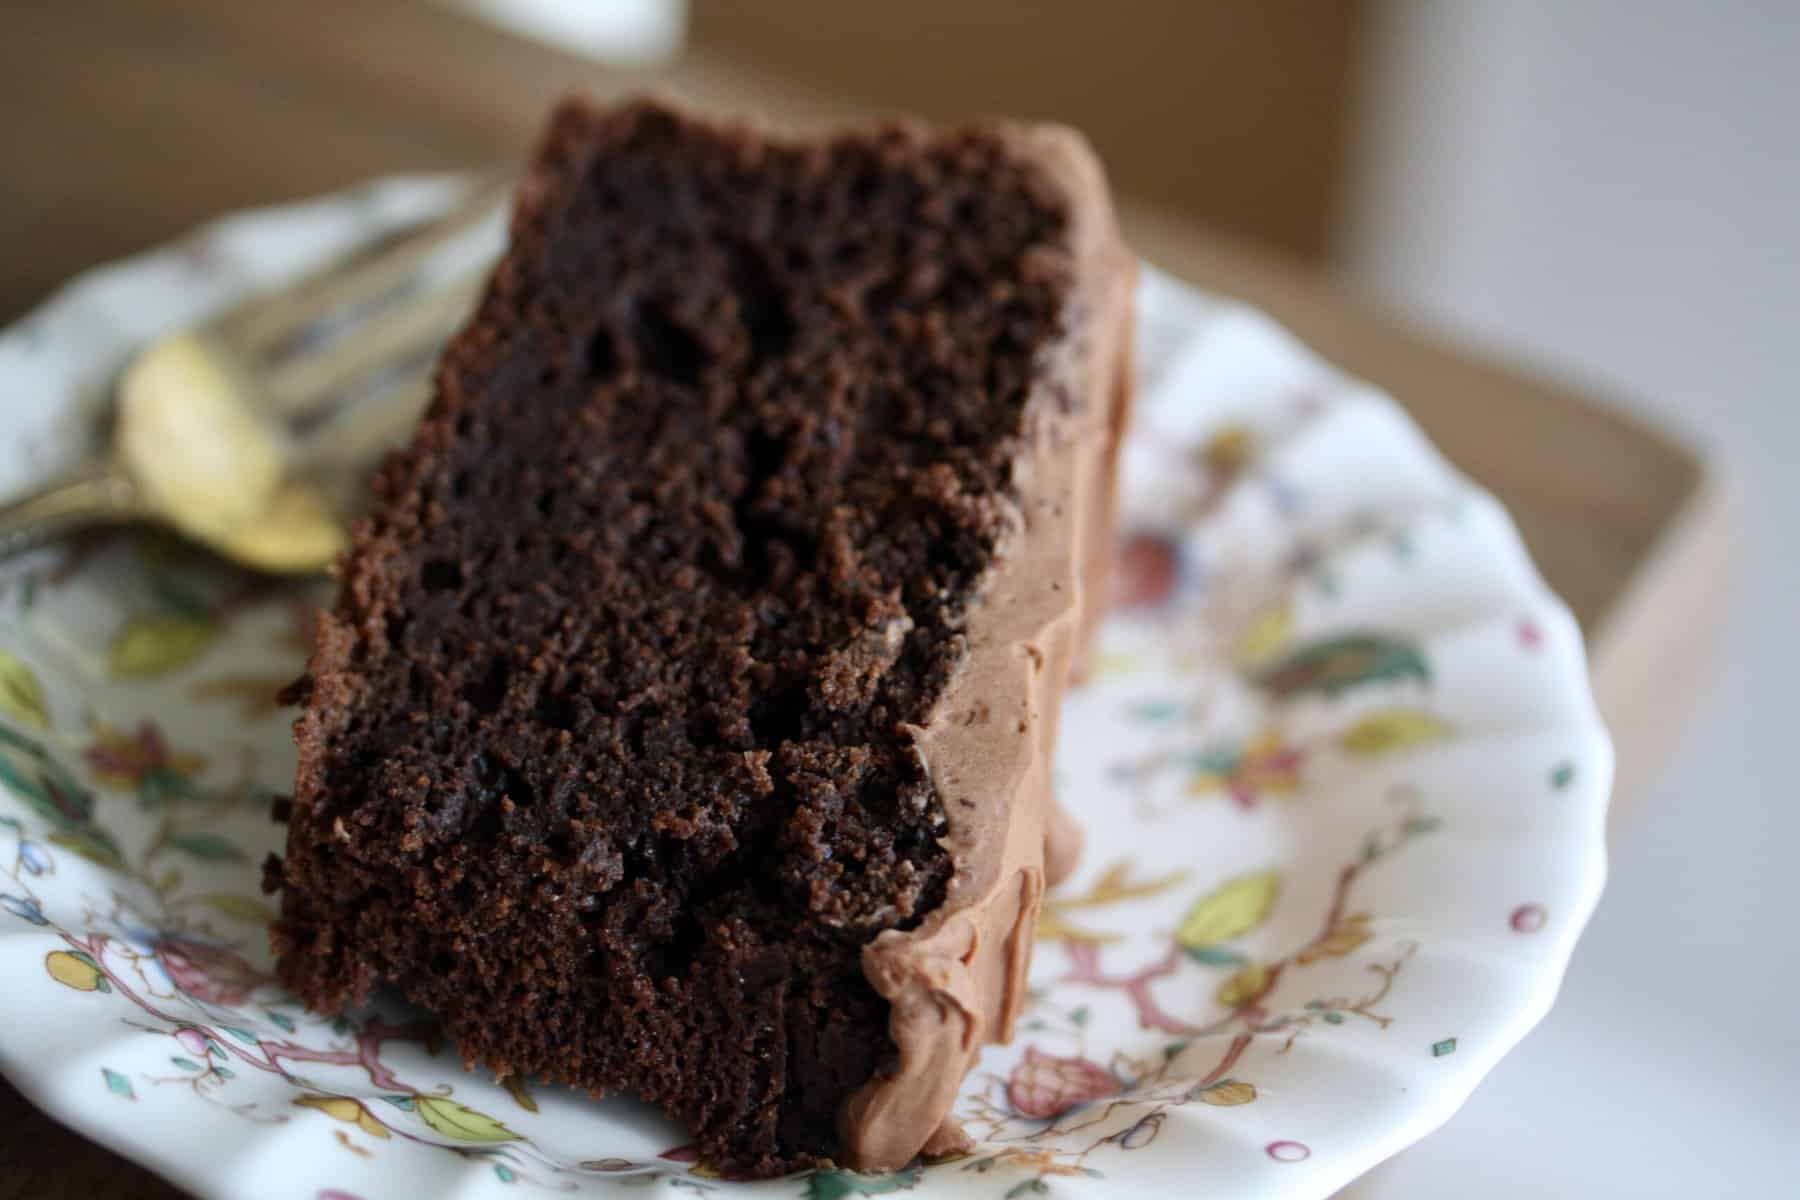 A slice of oat flour chocolate cake on a pretty plate with a fork.